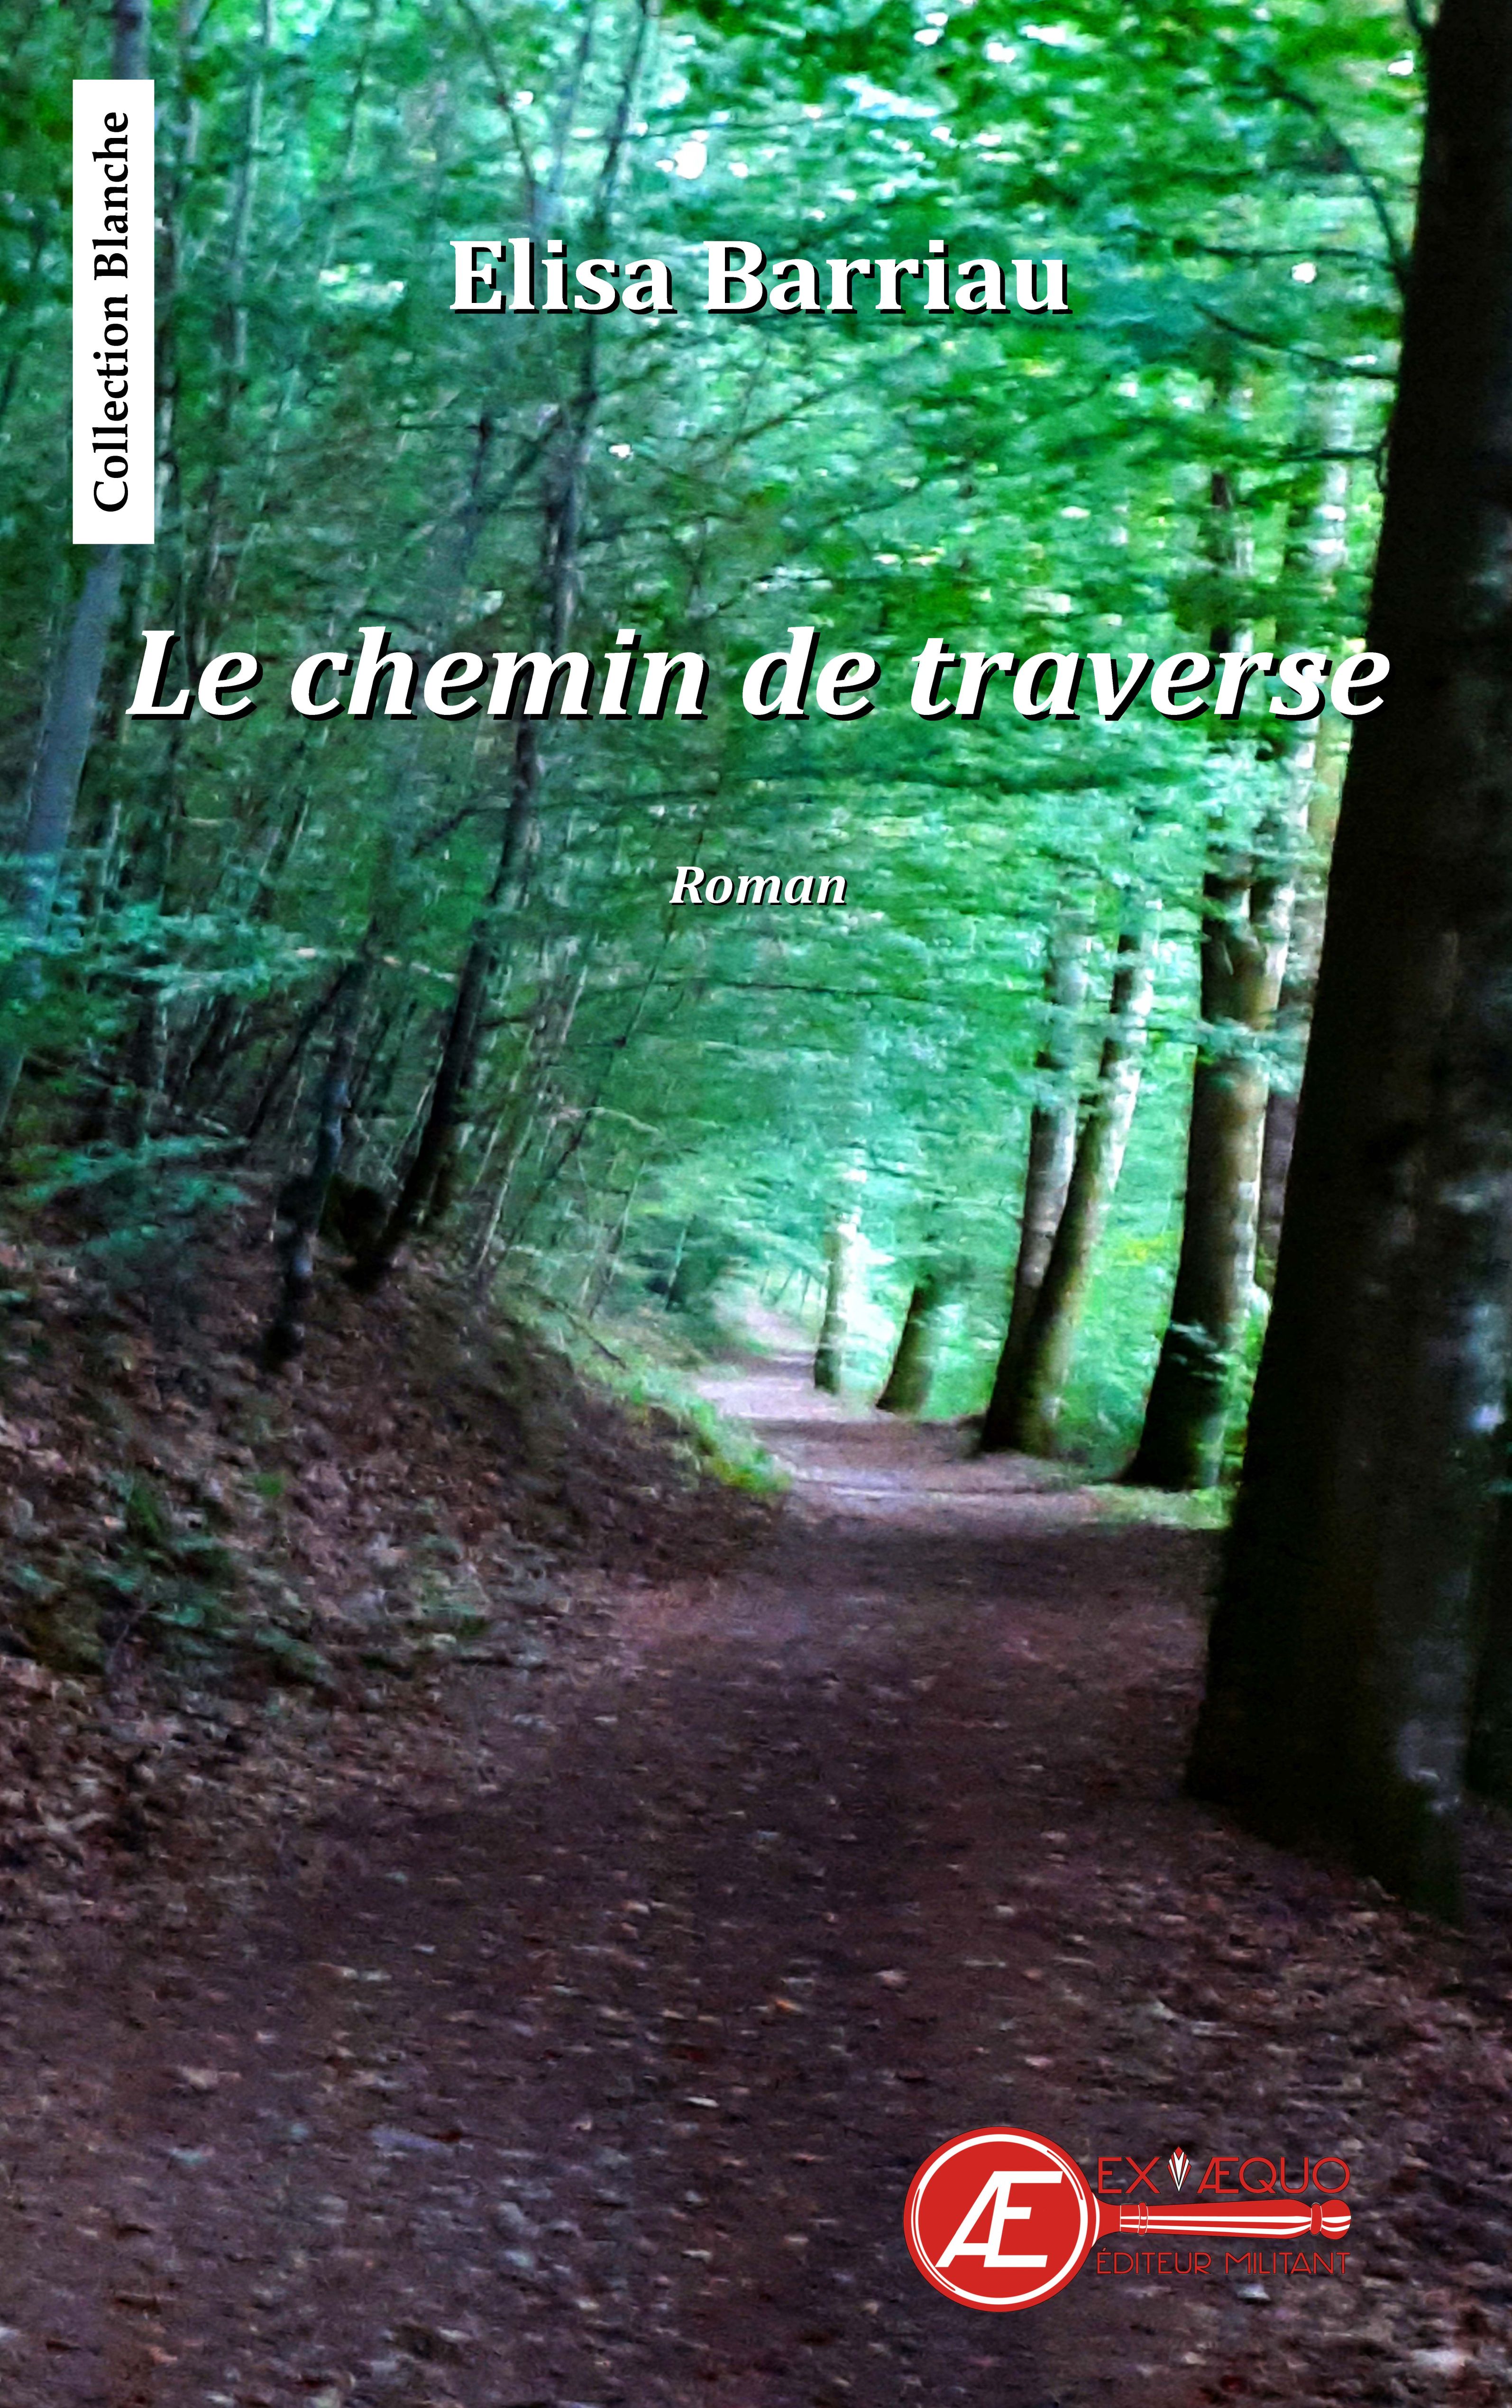 You are currently viewing Le chemin de traverse, d’Elisa Bariau